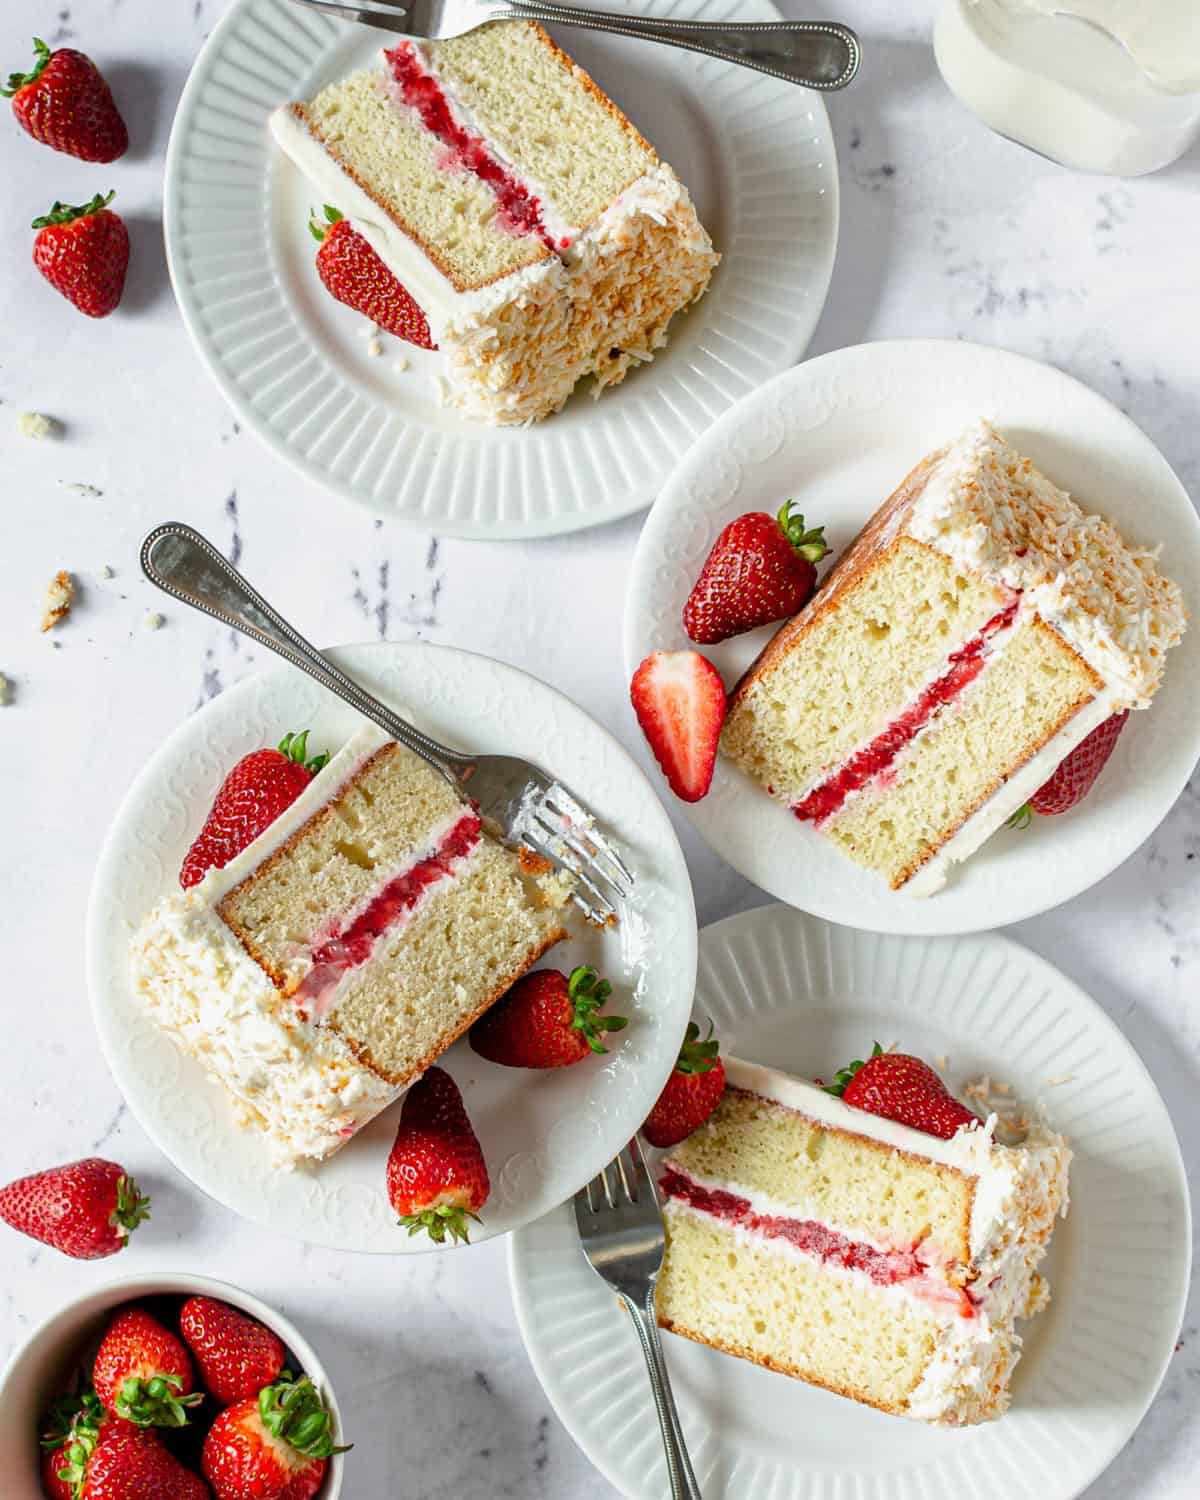 Four slices of coconut strawberry cake on plates with forks.